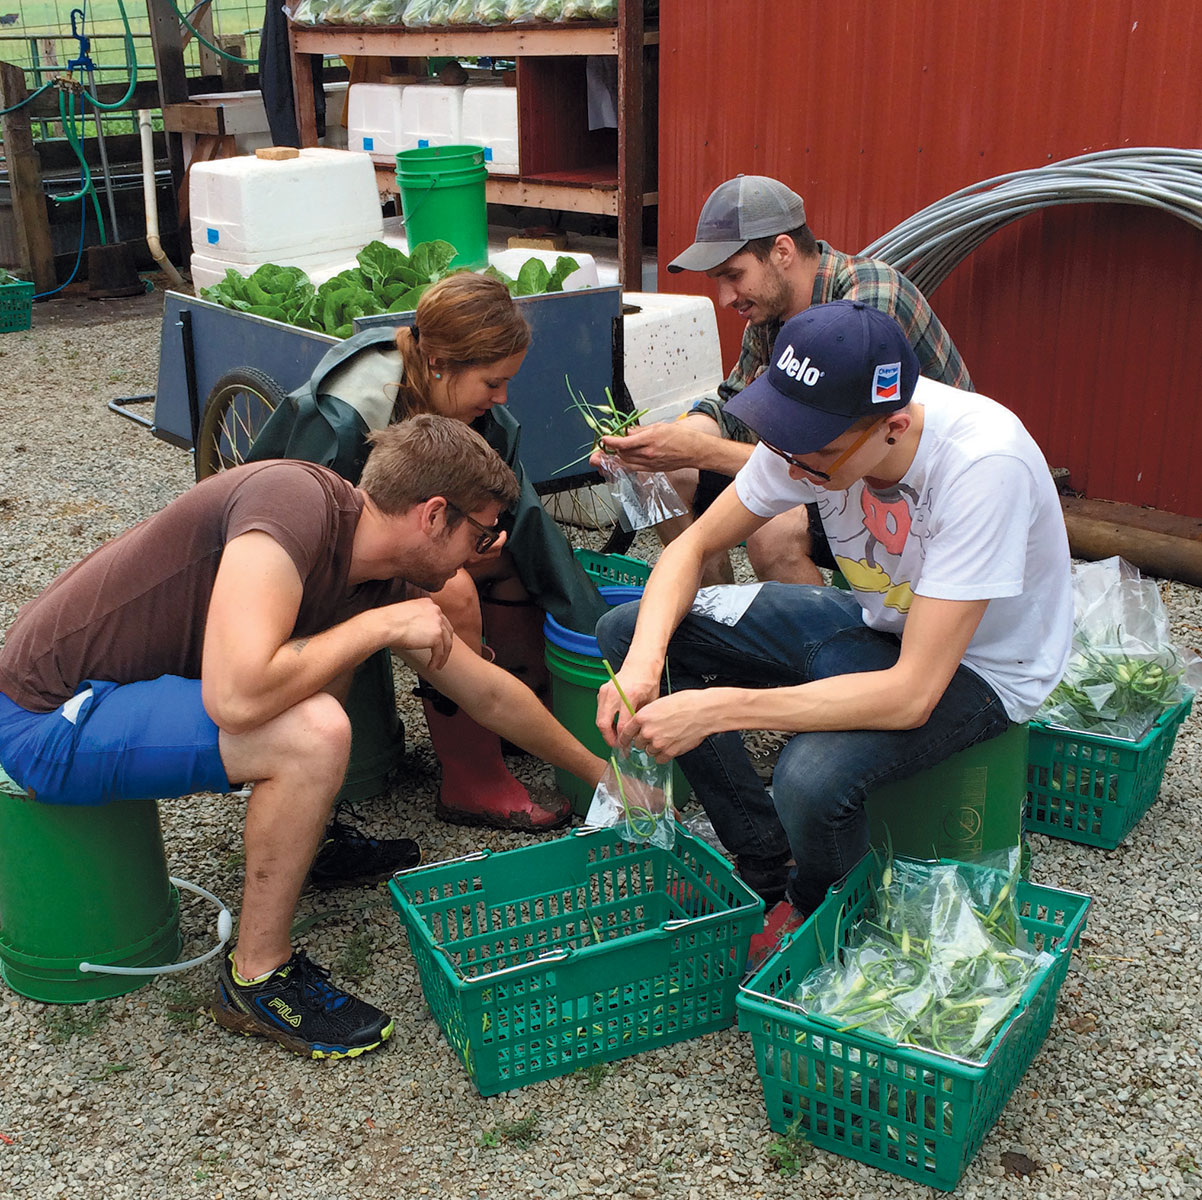 Cerulean staff helping harving and pack shares for the CSA.